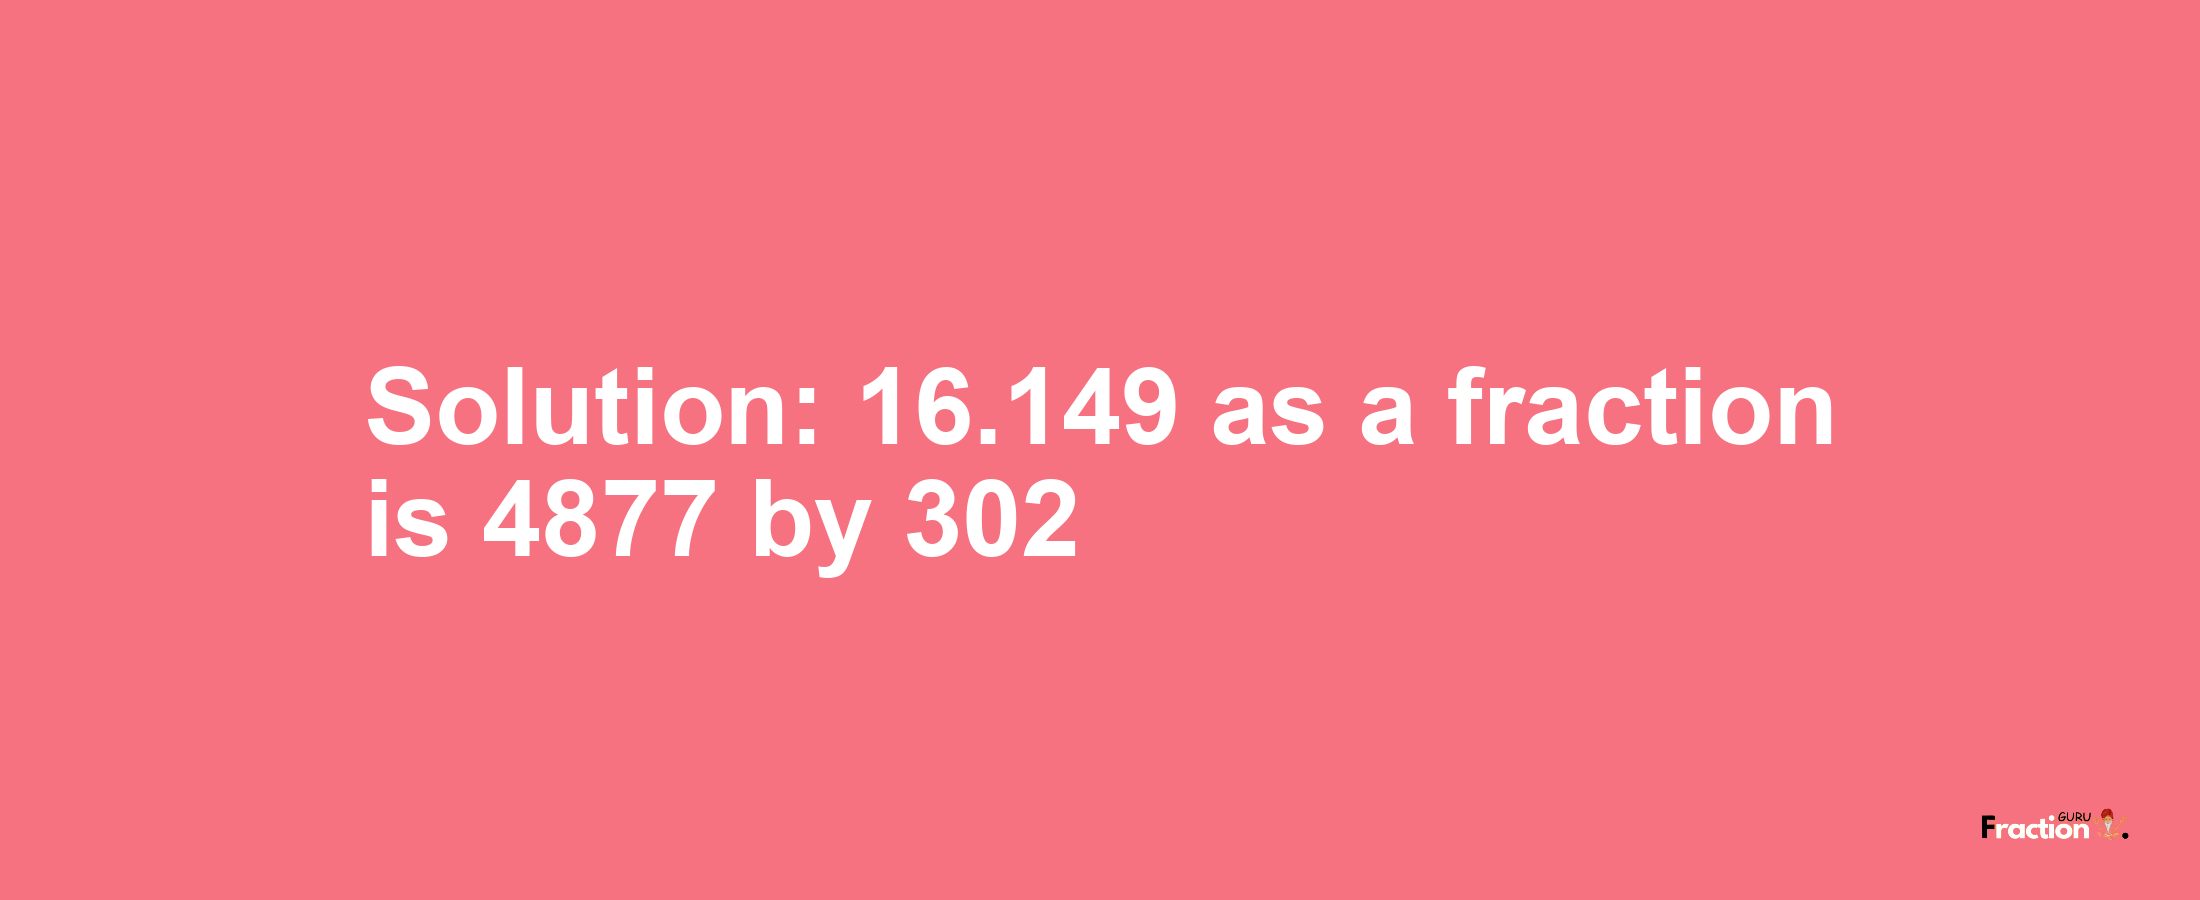 Solution:16.149 as a fraction is 4877/302